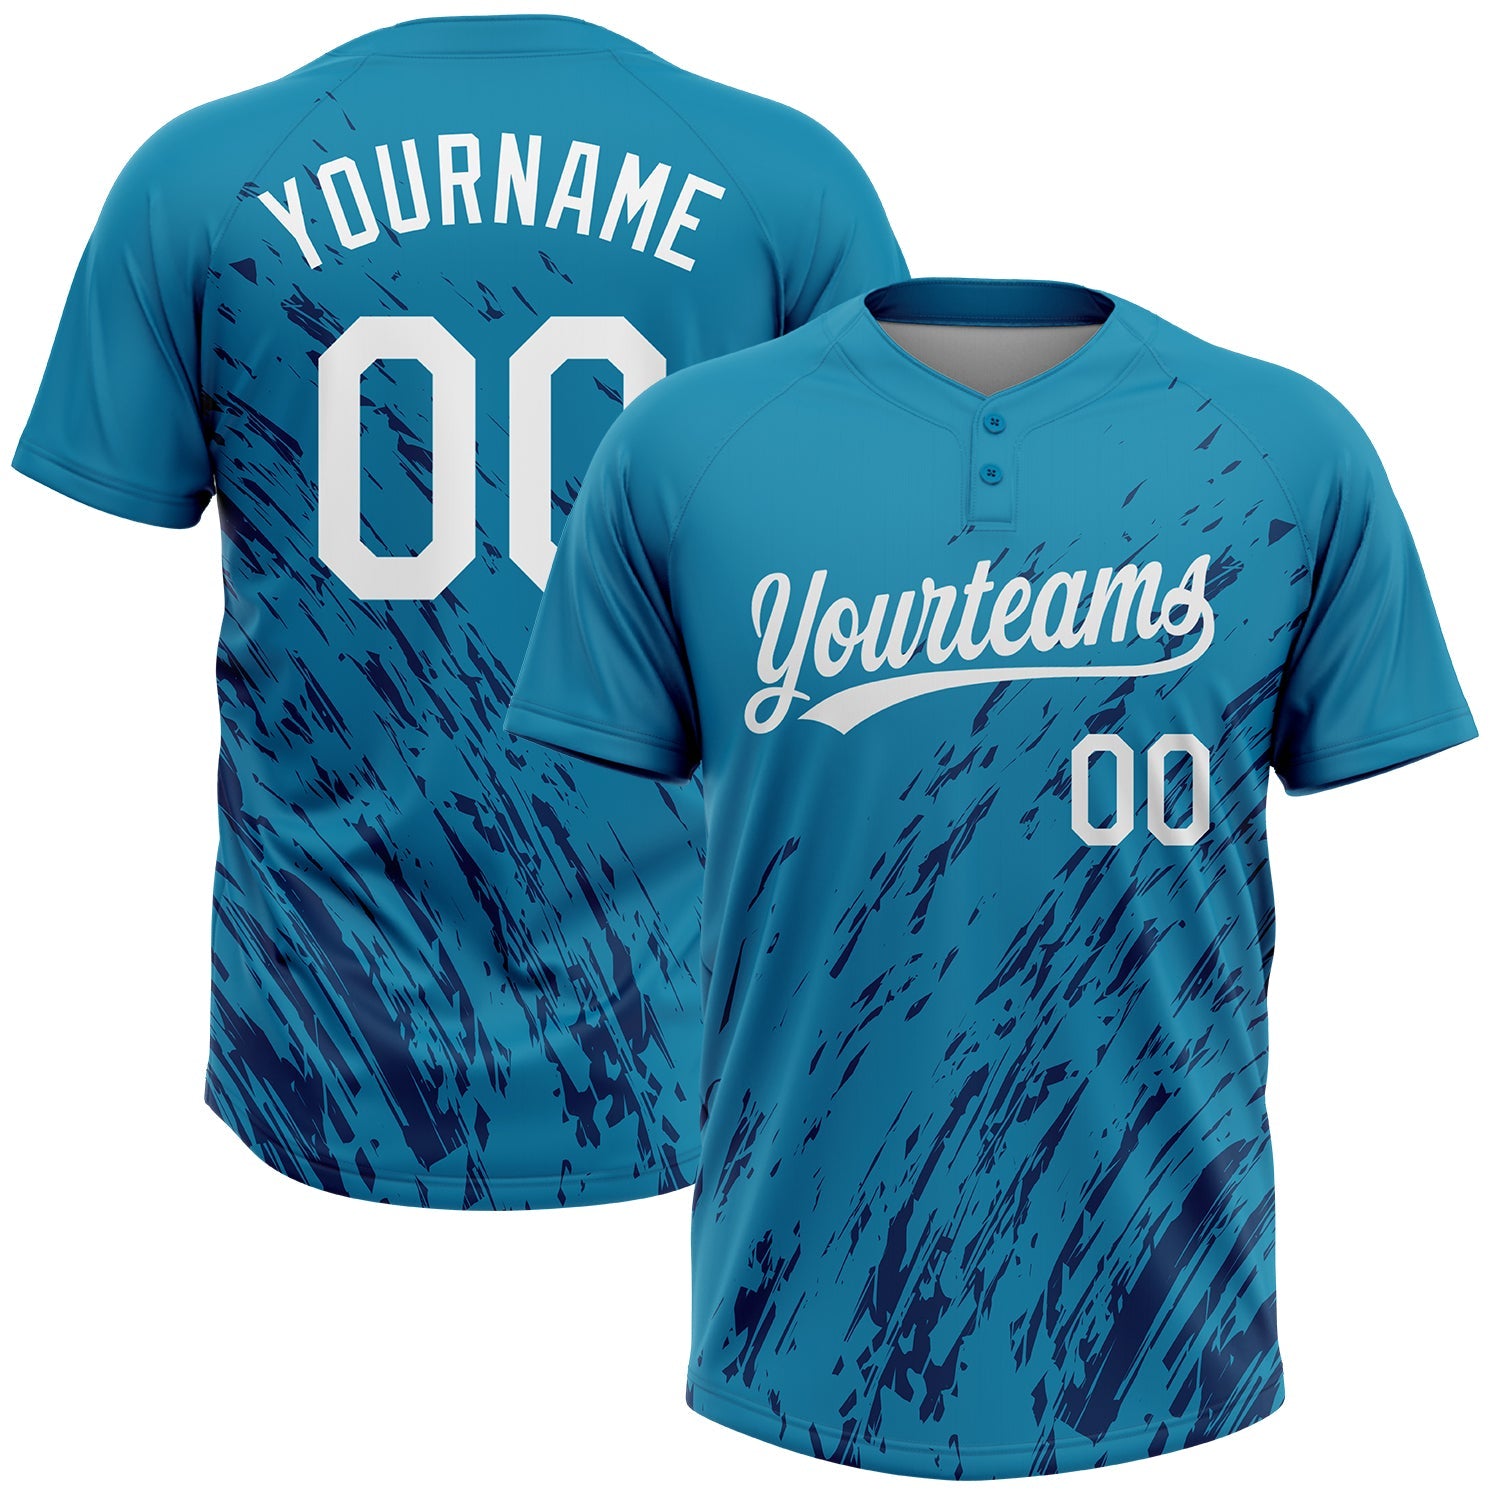 Custom Teal White-Royal Flame Two-Button Unisex Softball Jersey